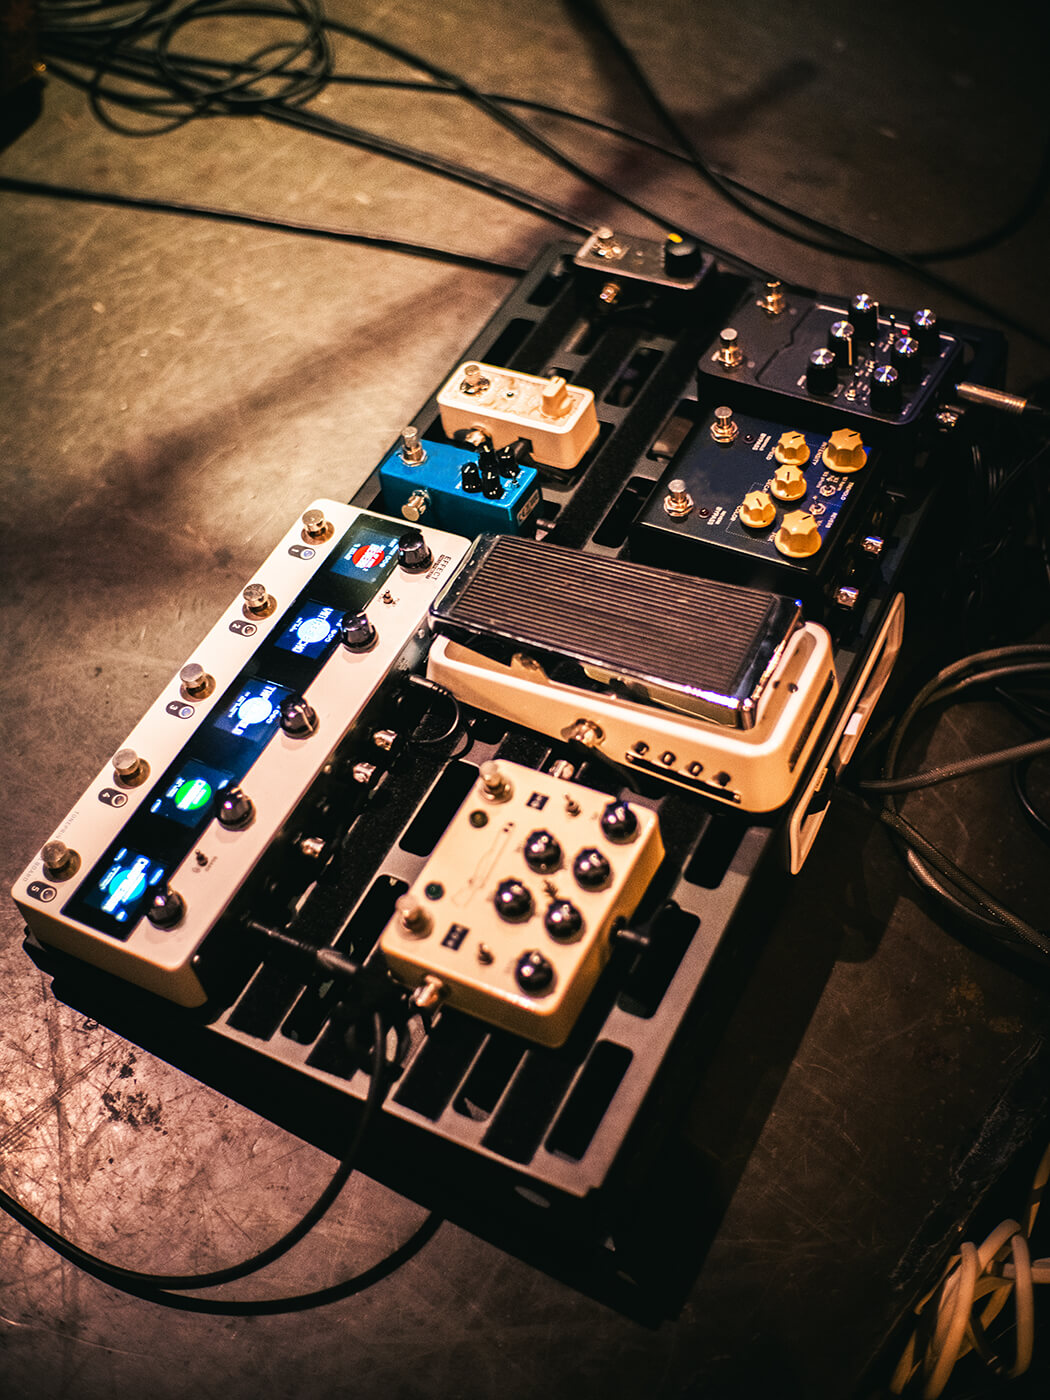 Guitar pedals on a pedalboard, photo by Kunihito Ikeda/Getty Images